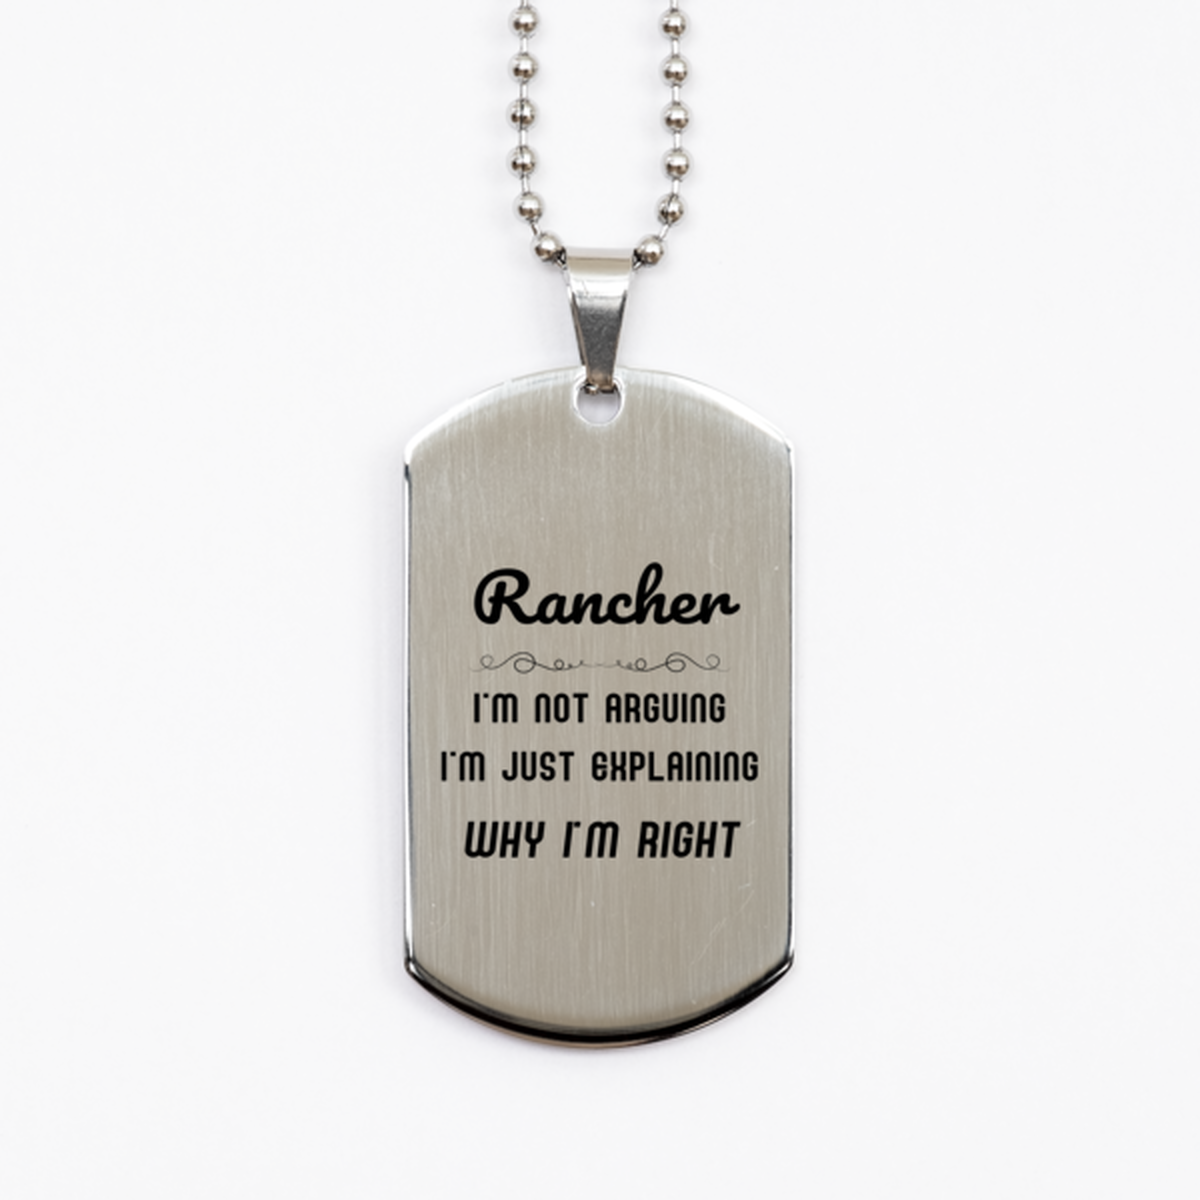 Rancher I'm not Arguing. I'm Just Explaining Why I'm RIGHT Silver Dog Tag, Funny Saying Quote Rancher Gifts For Rancher Graduation Birthday Christmas Gifts for Men Women Coworker